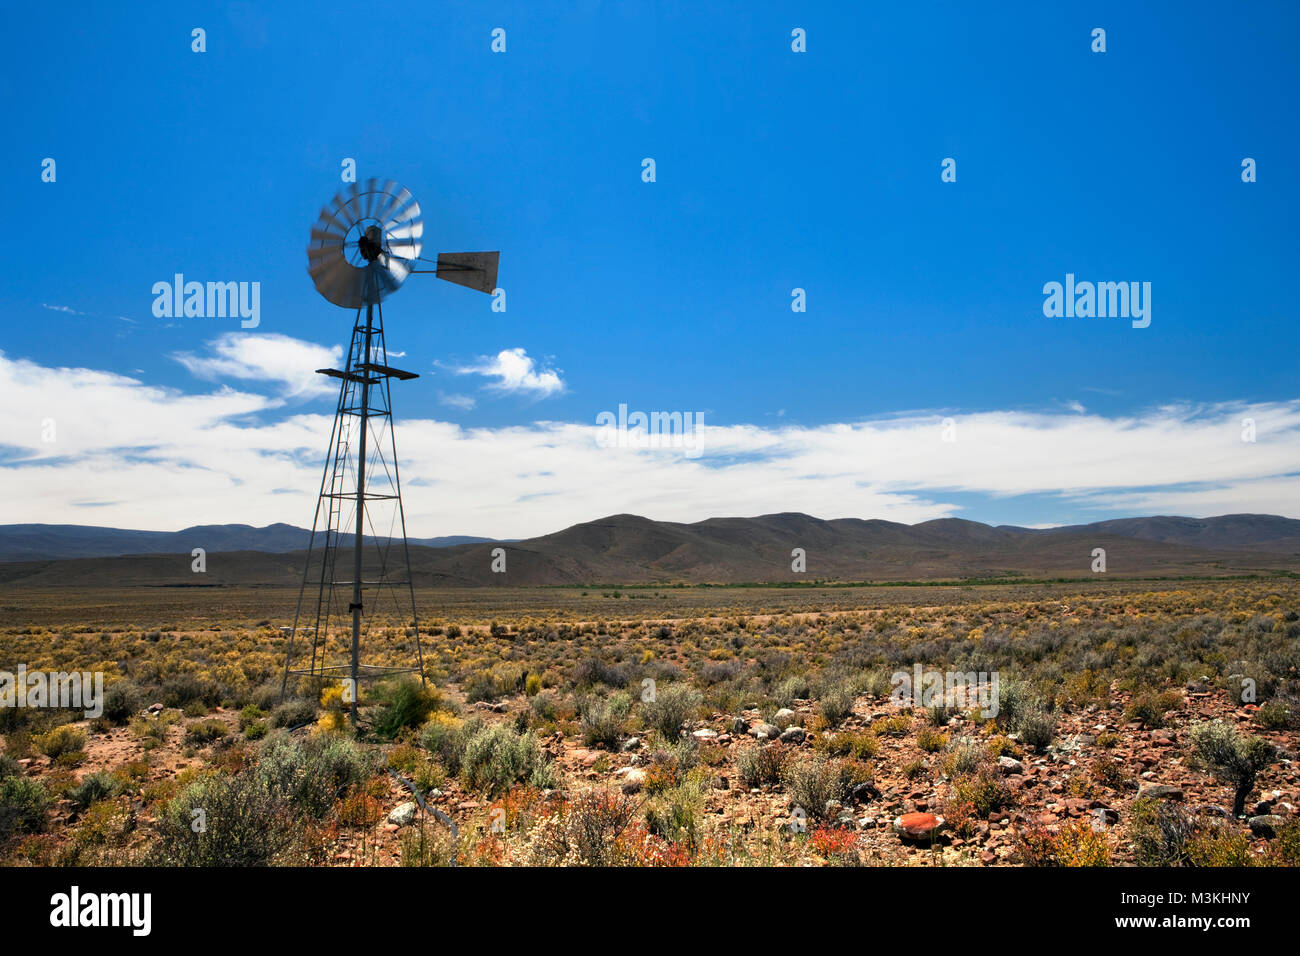 South Africa, Northern Cape, Sutherland, Windmill. Stock Photo